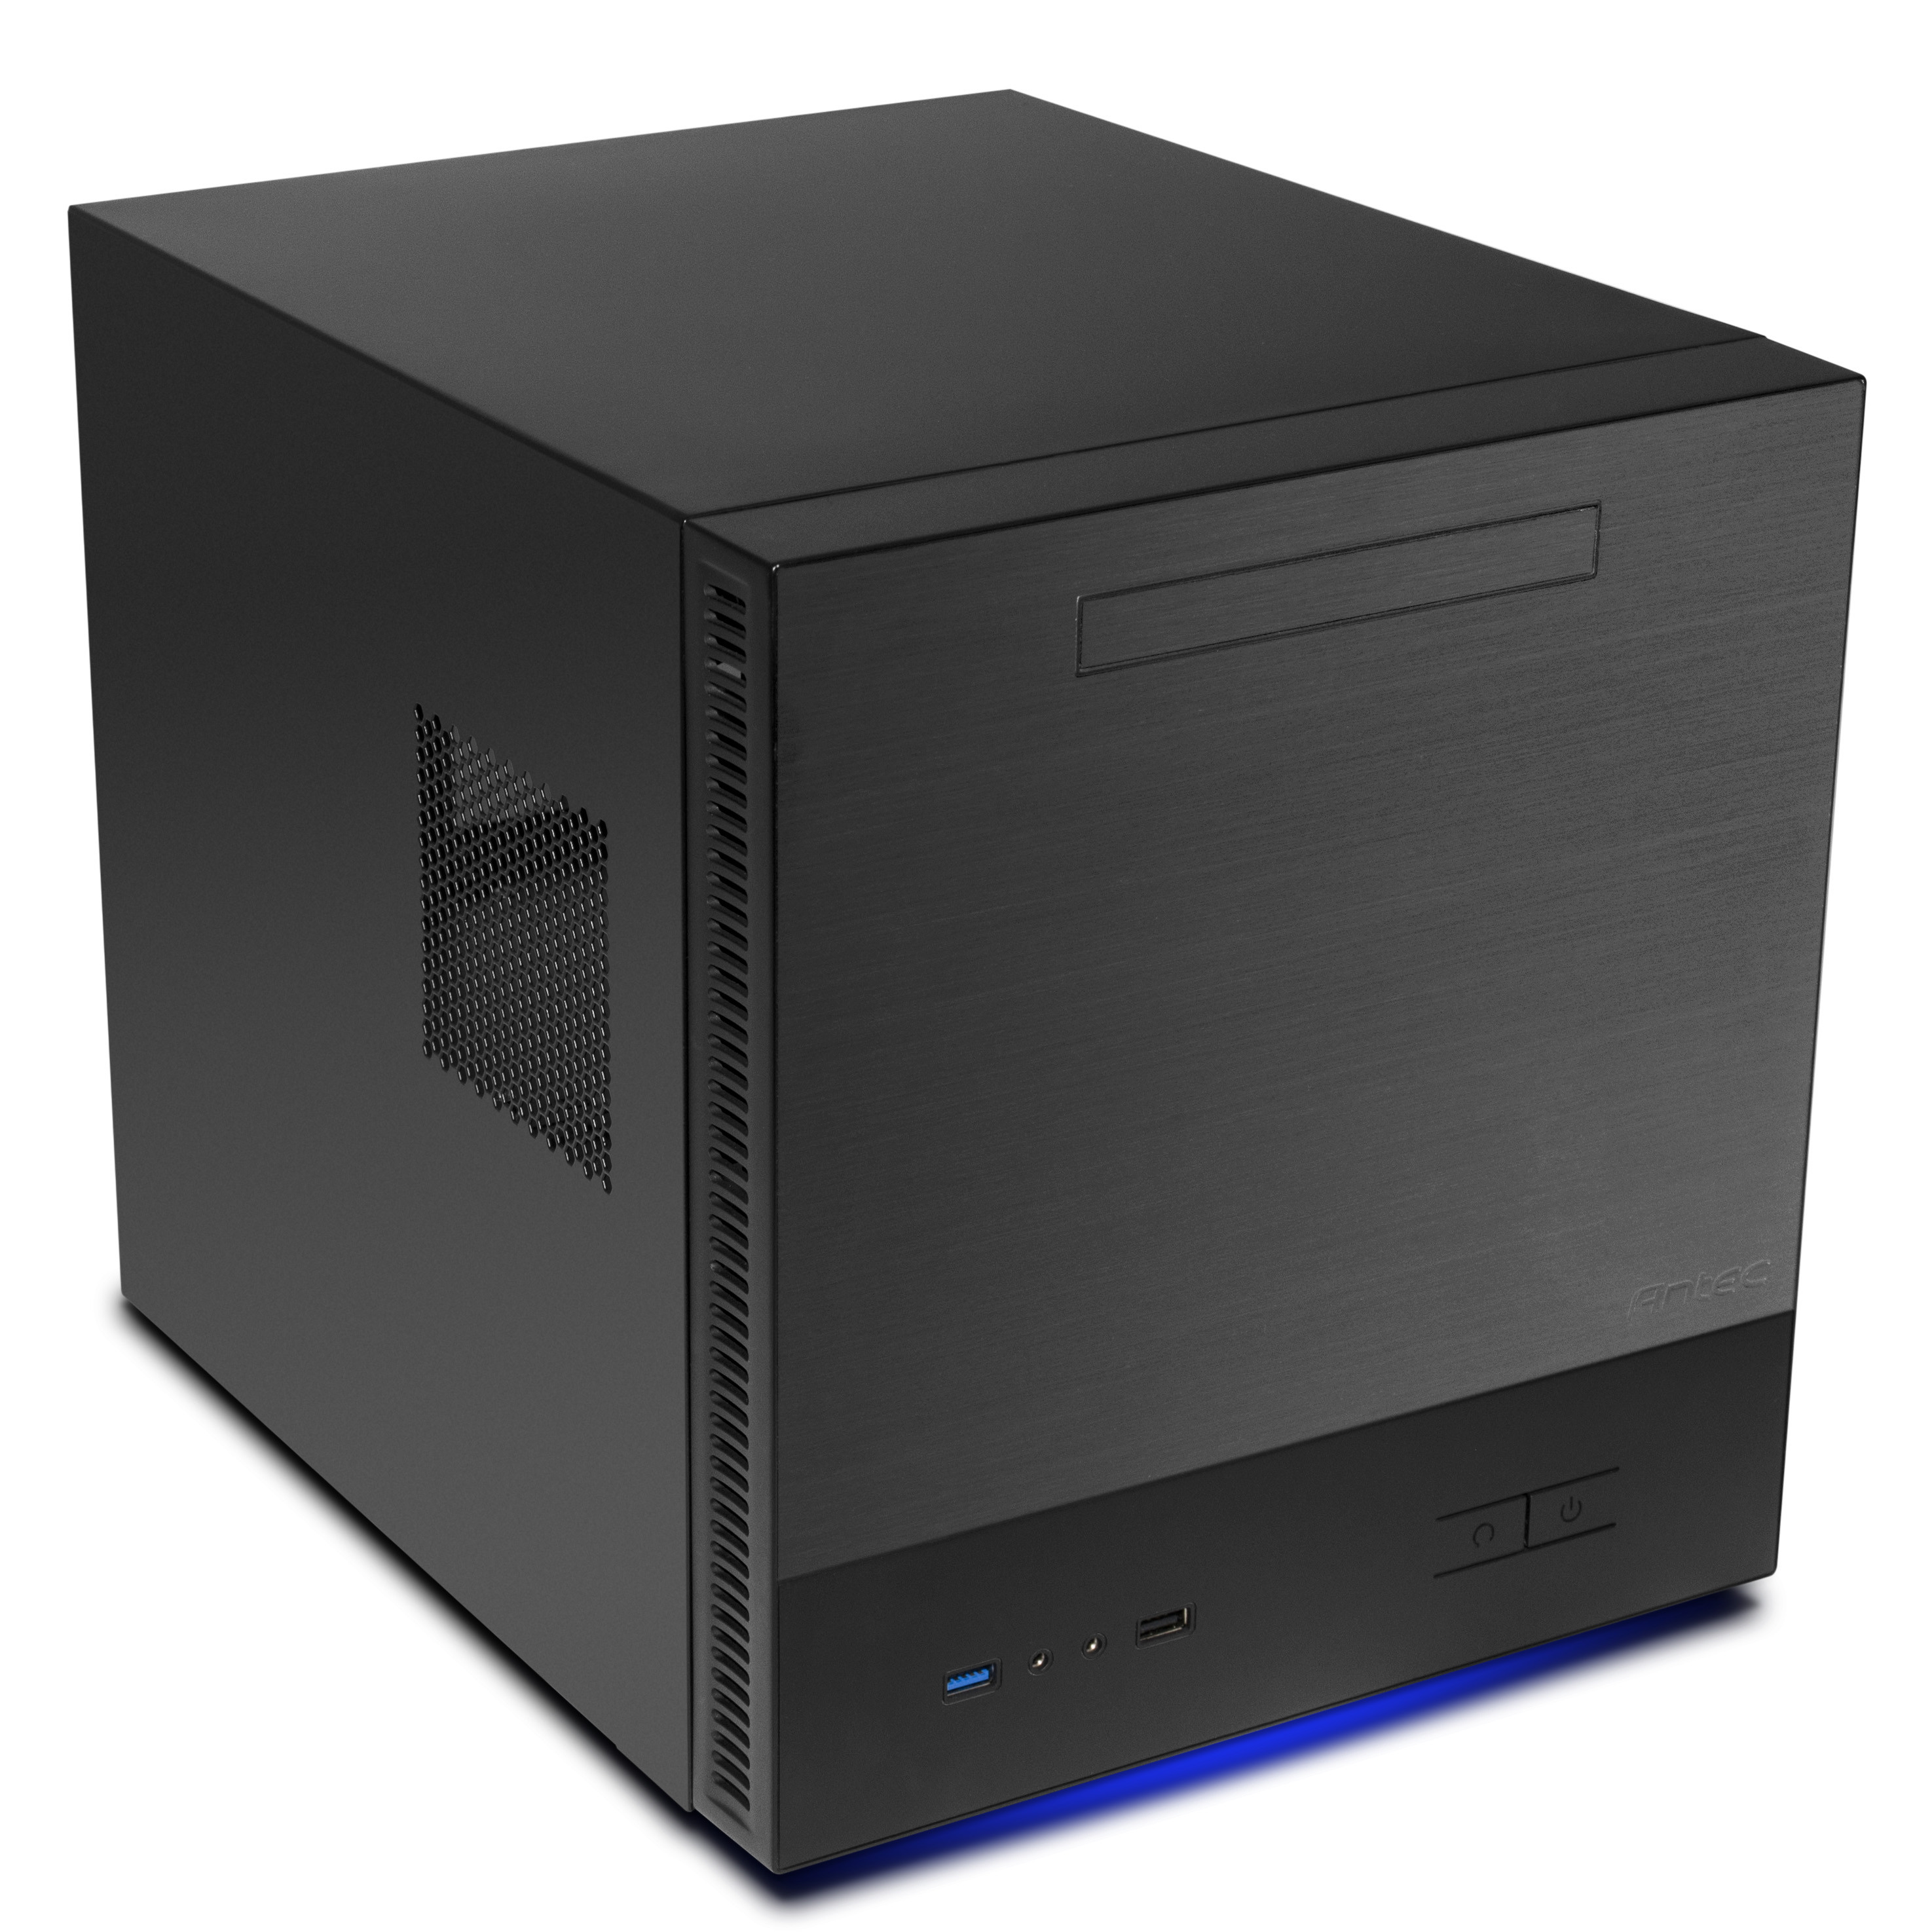 Antec Launches New Micro-ATX Case ISK600M | techPowerUp